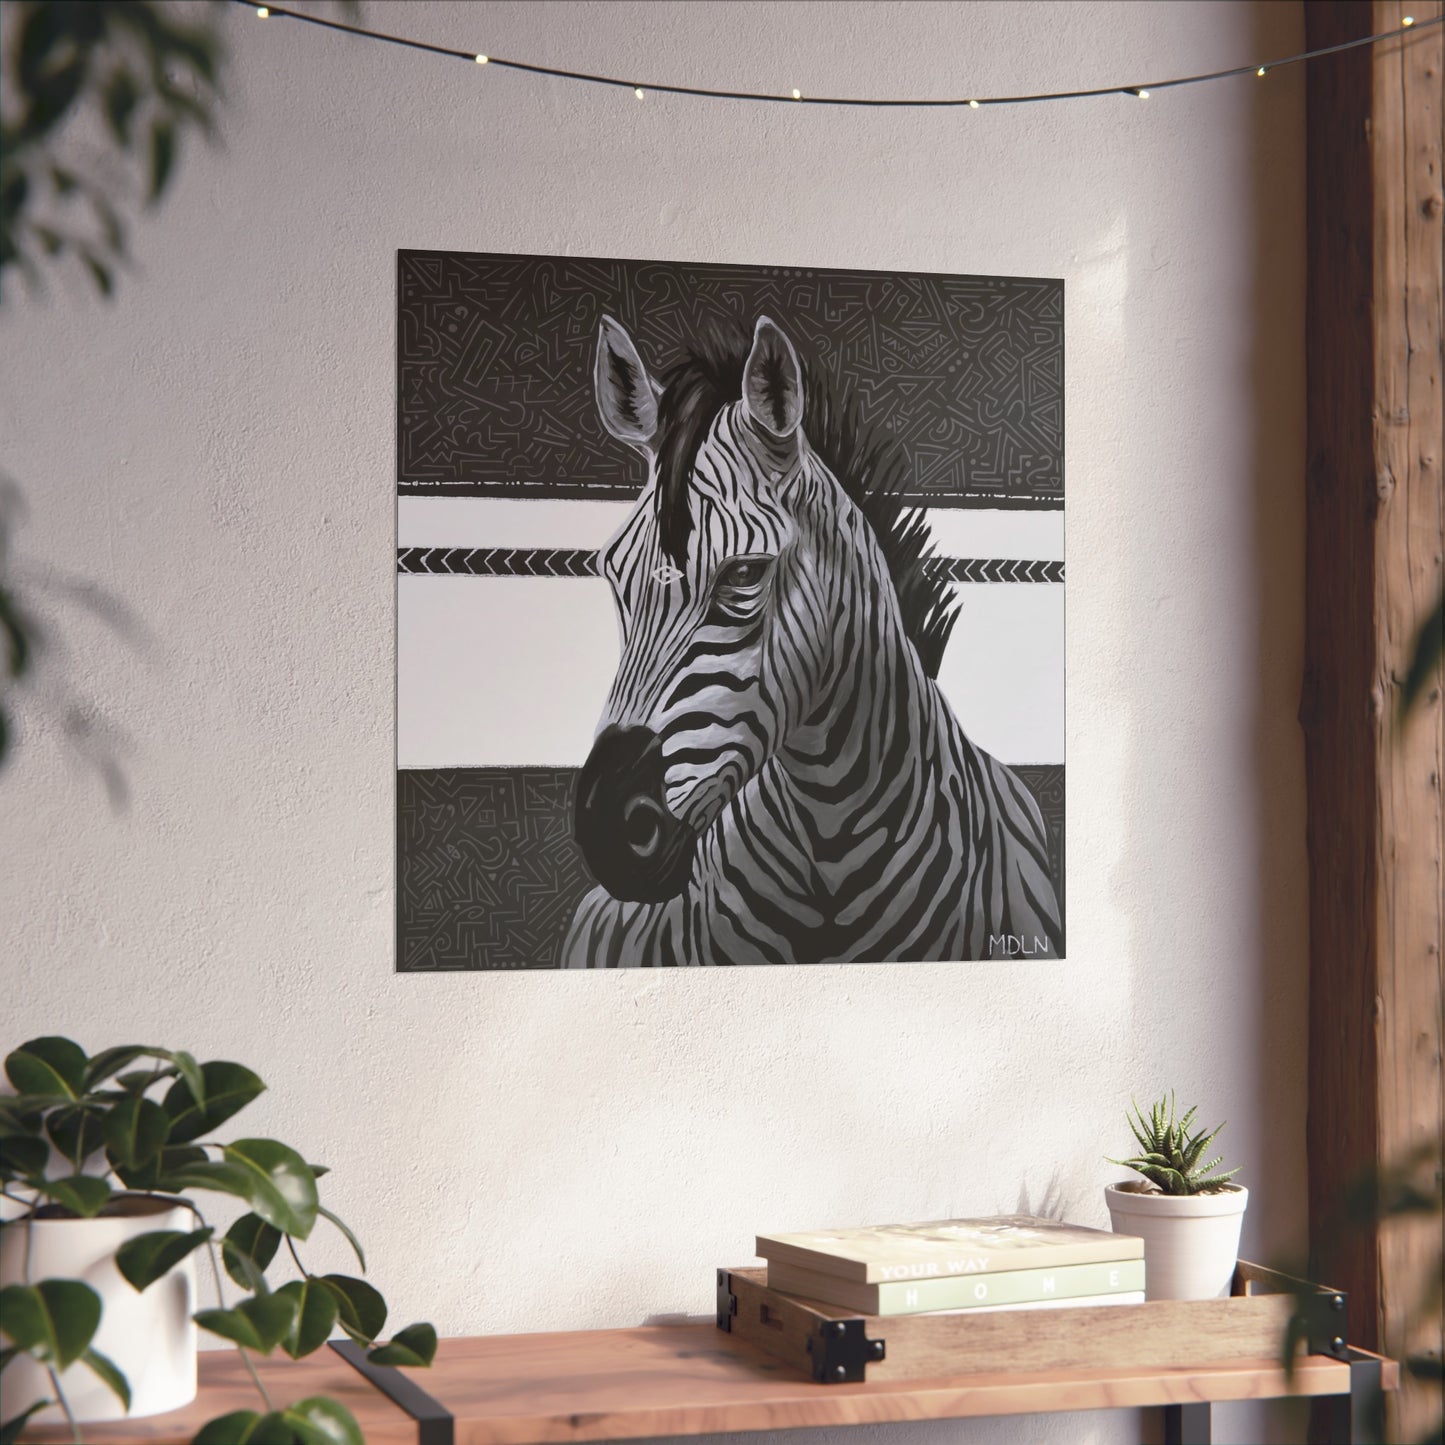 A black and white  giclee art print of a majestic zebra painting with abstract background, zebra art hanging on a wall over a wooden table next to a plant